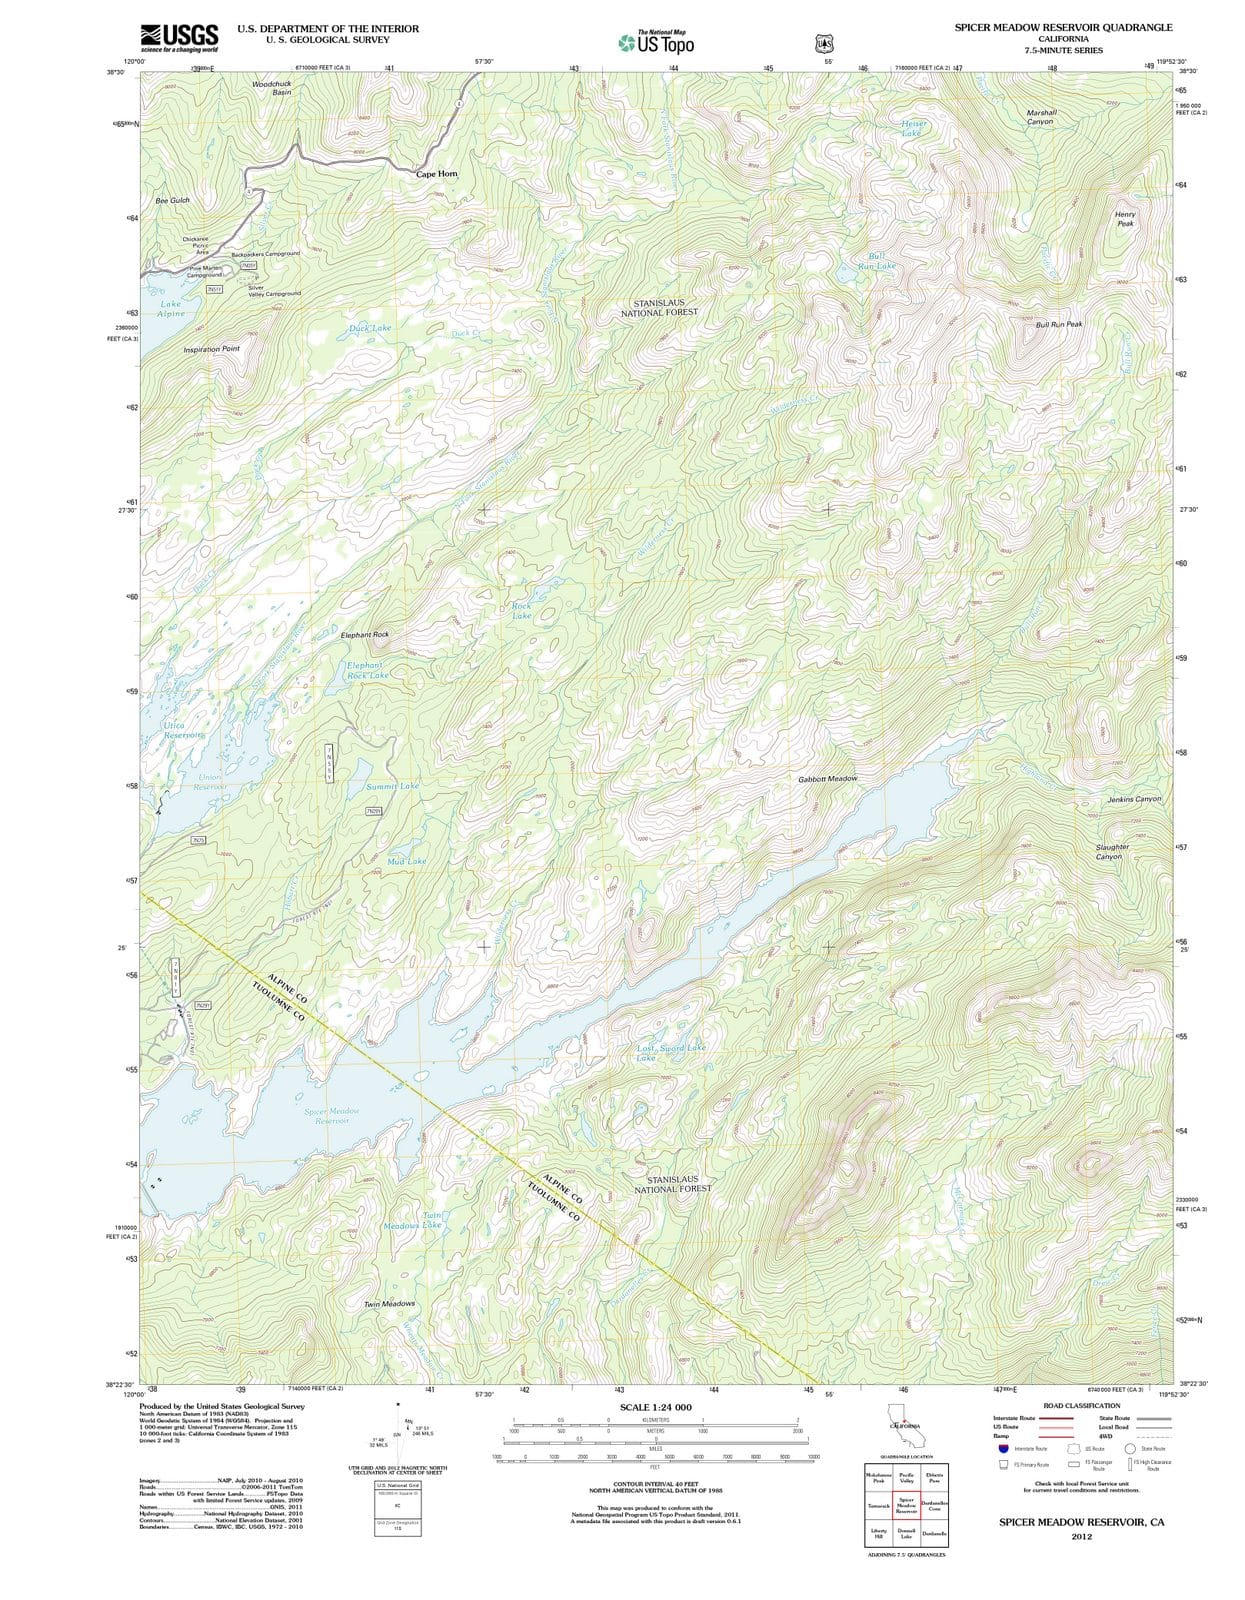 2012 Spicer Meadow Reservoir, CA - California - USGS Topographic Map